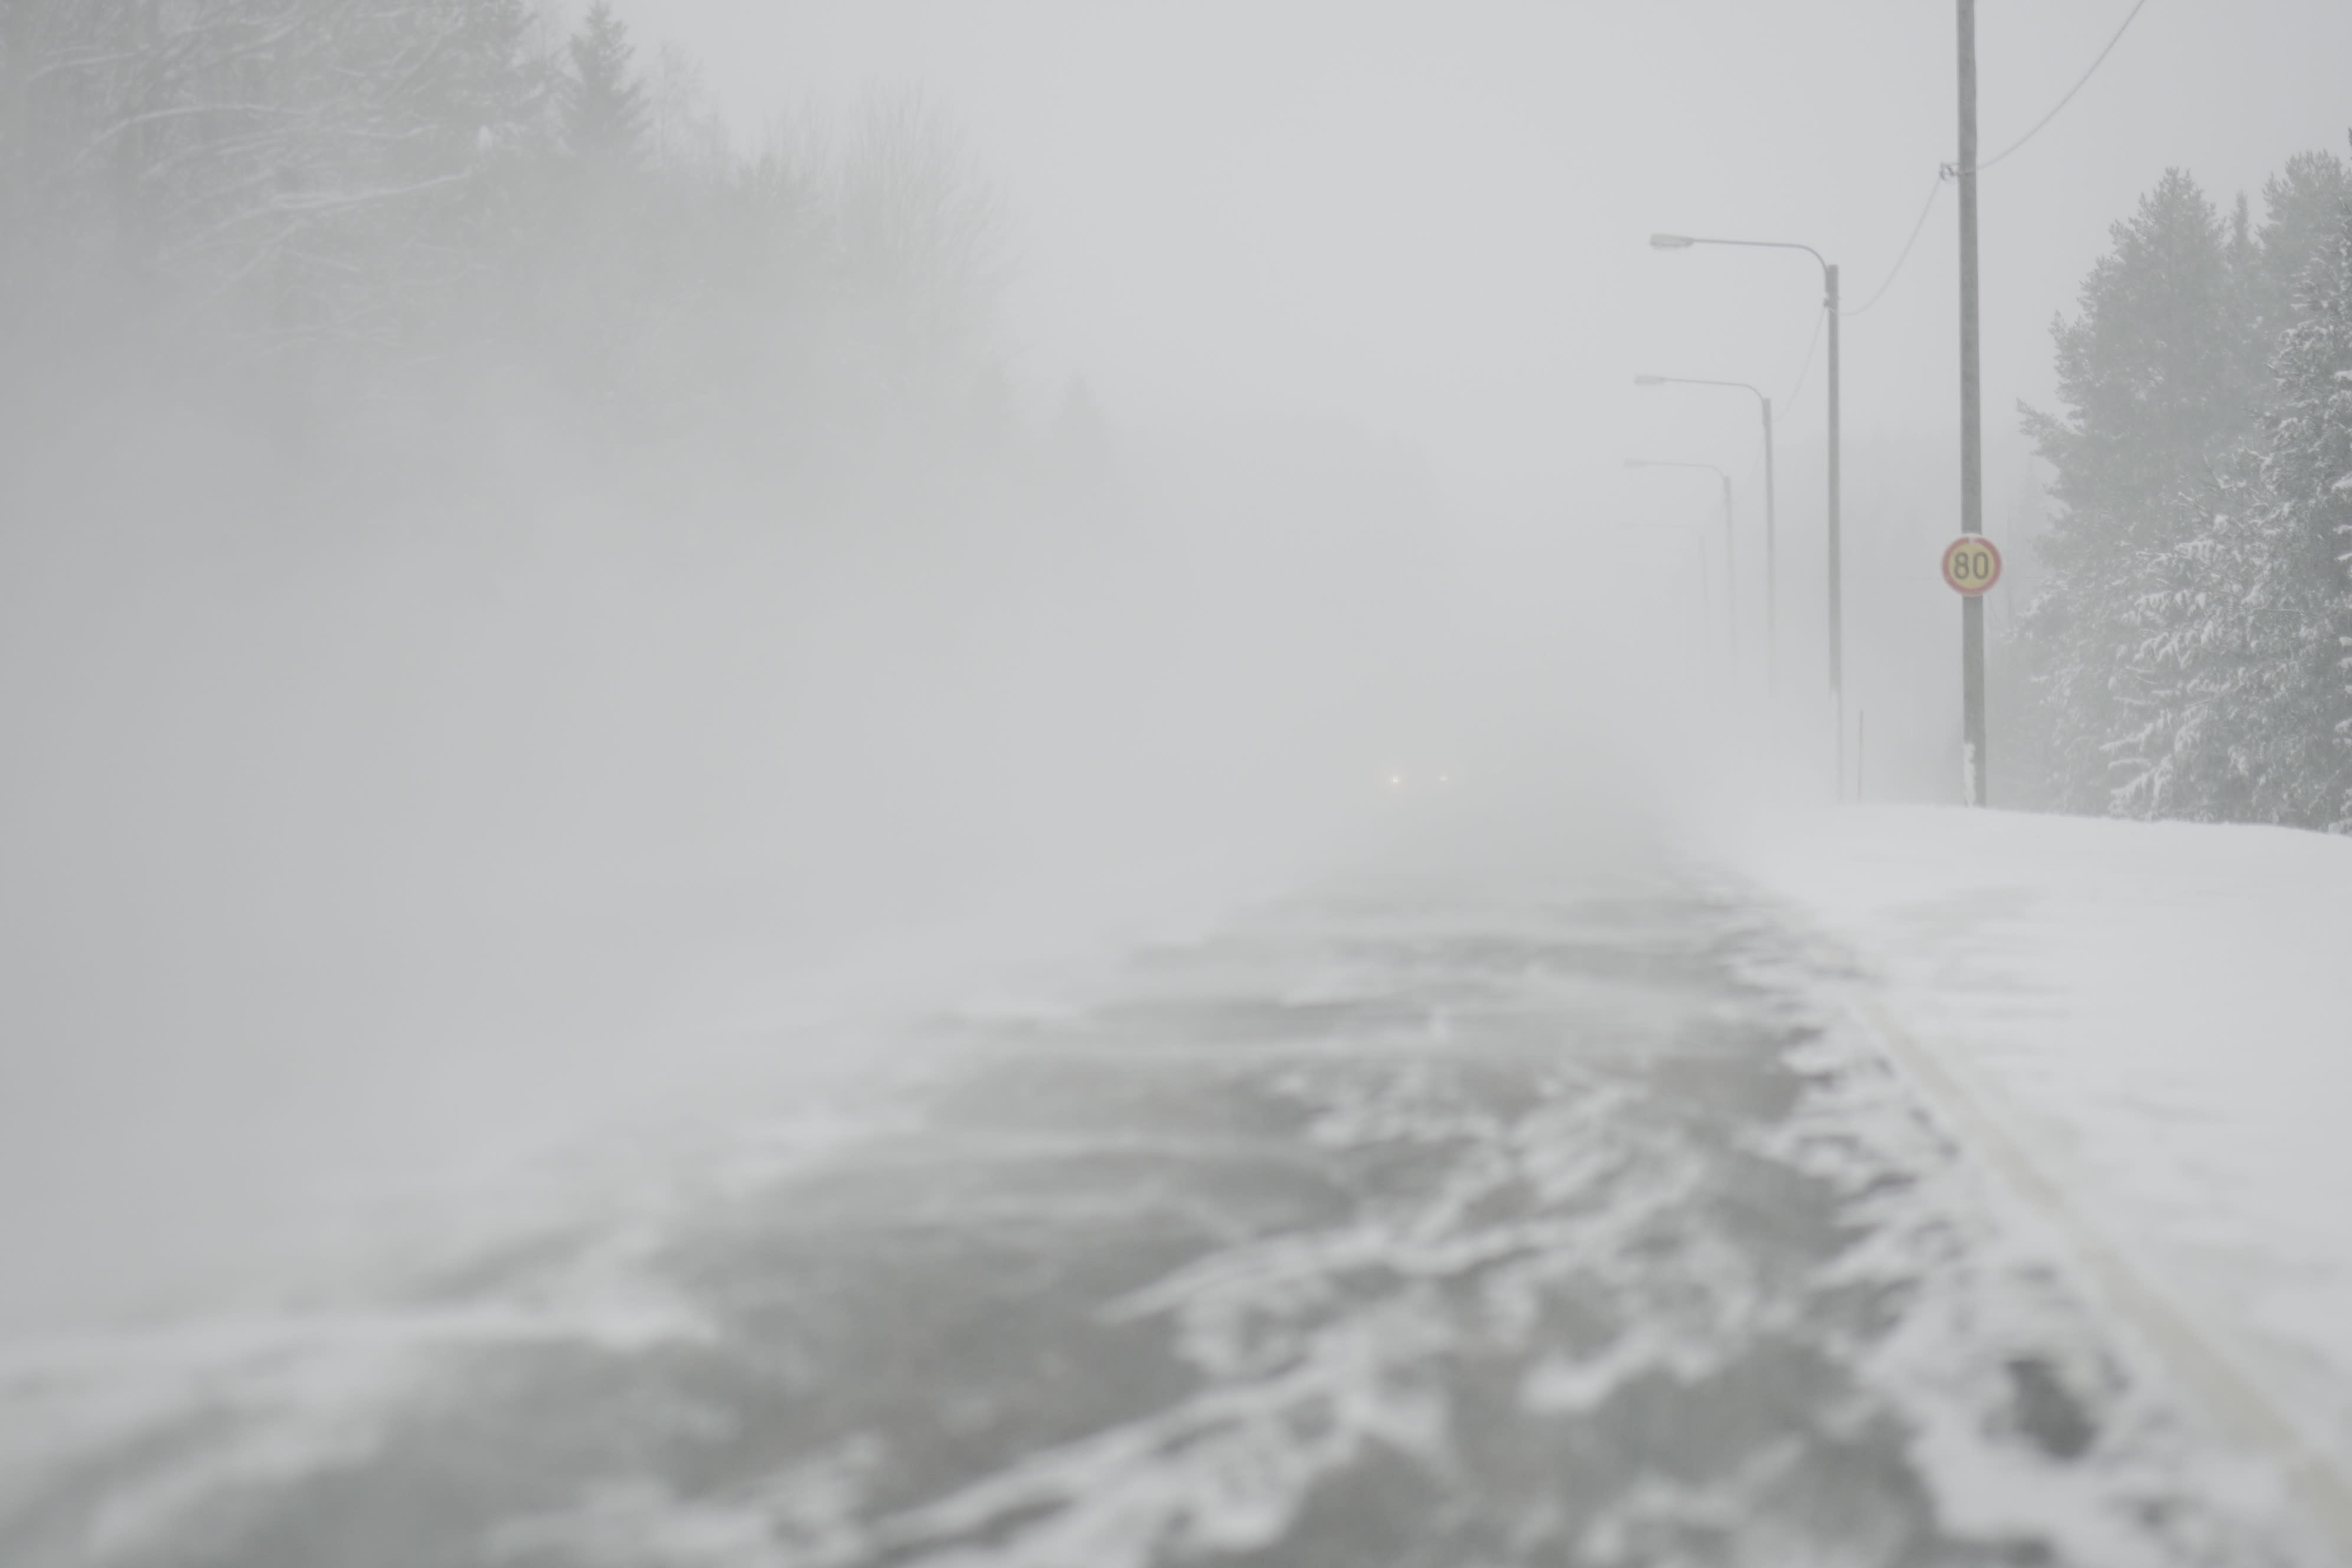 Motorists warned of poor driving conditions when snowstorms were predicted